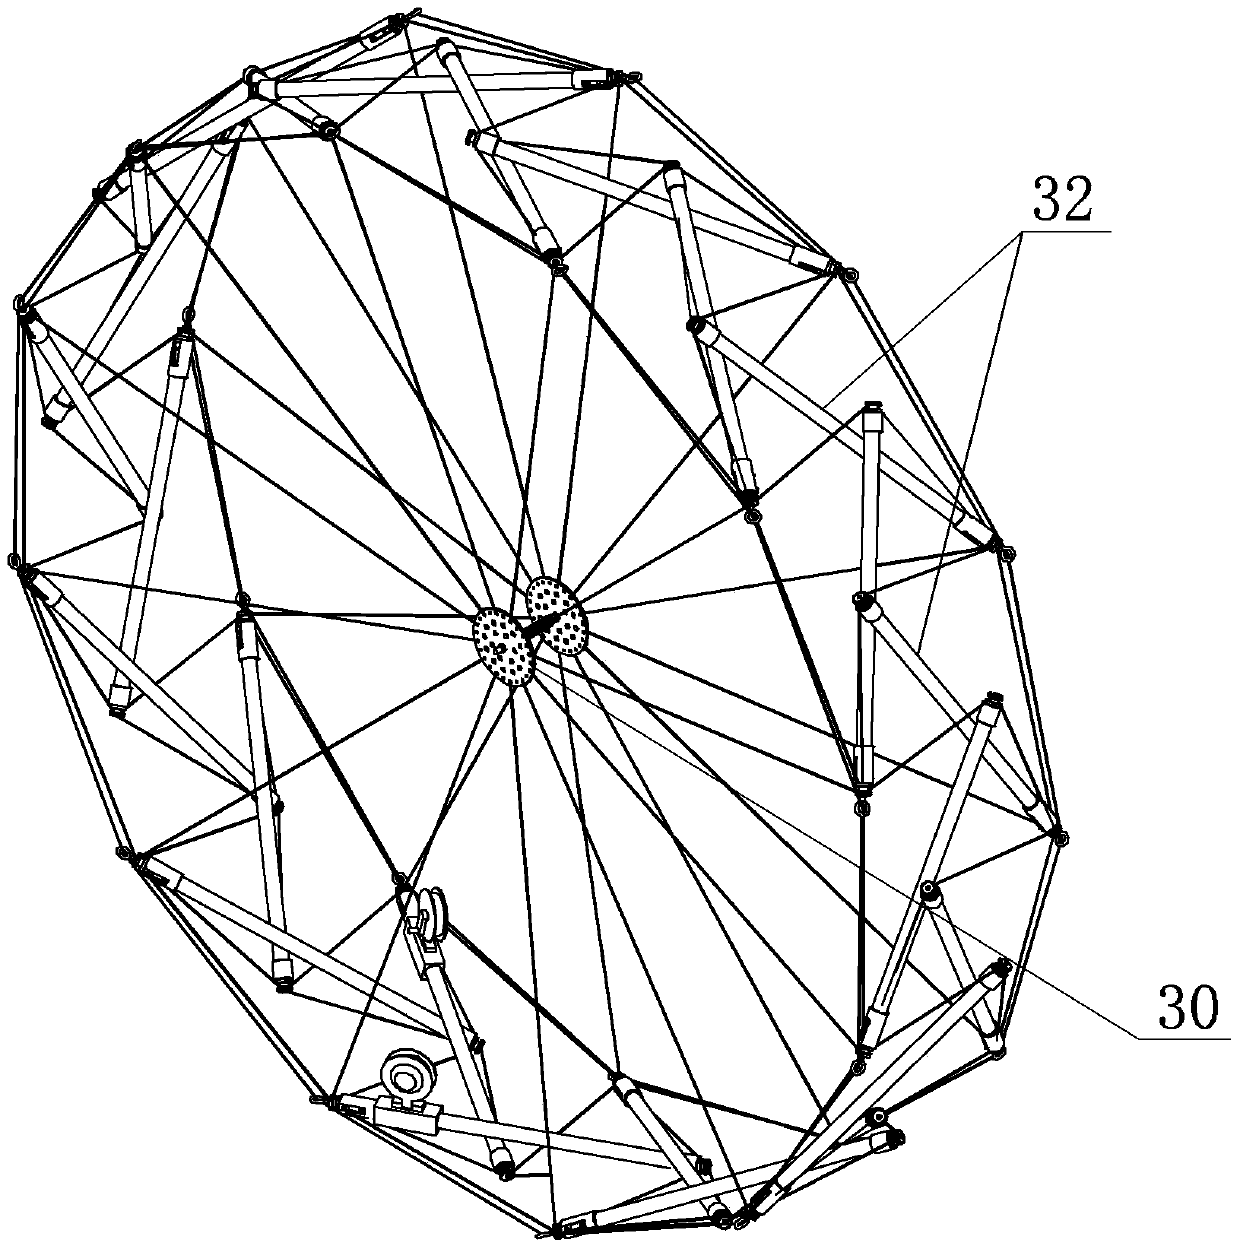 Spatially expandable annular tensegrity antenna mechanism